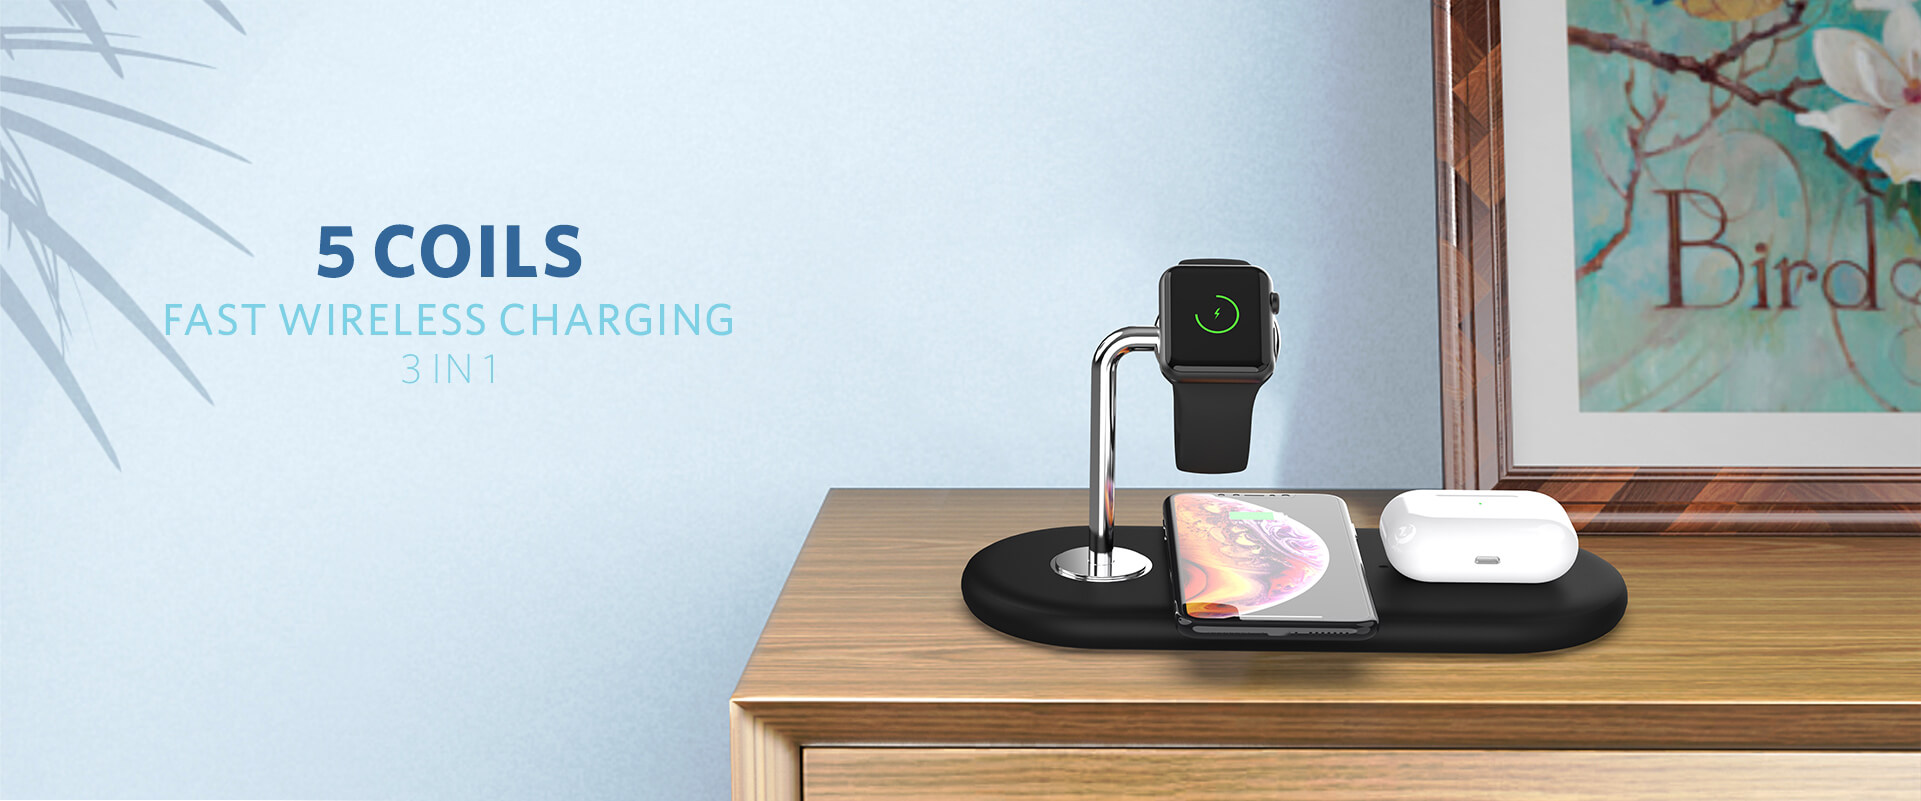 5 coils 3 in 1 wireless charger